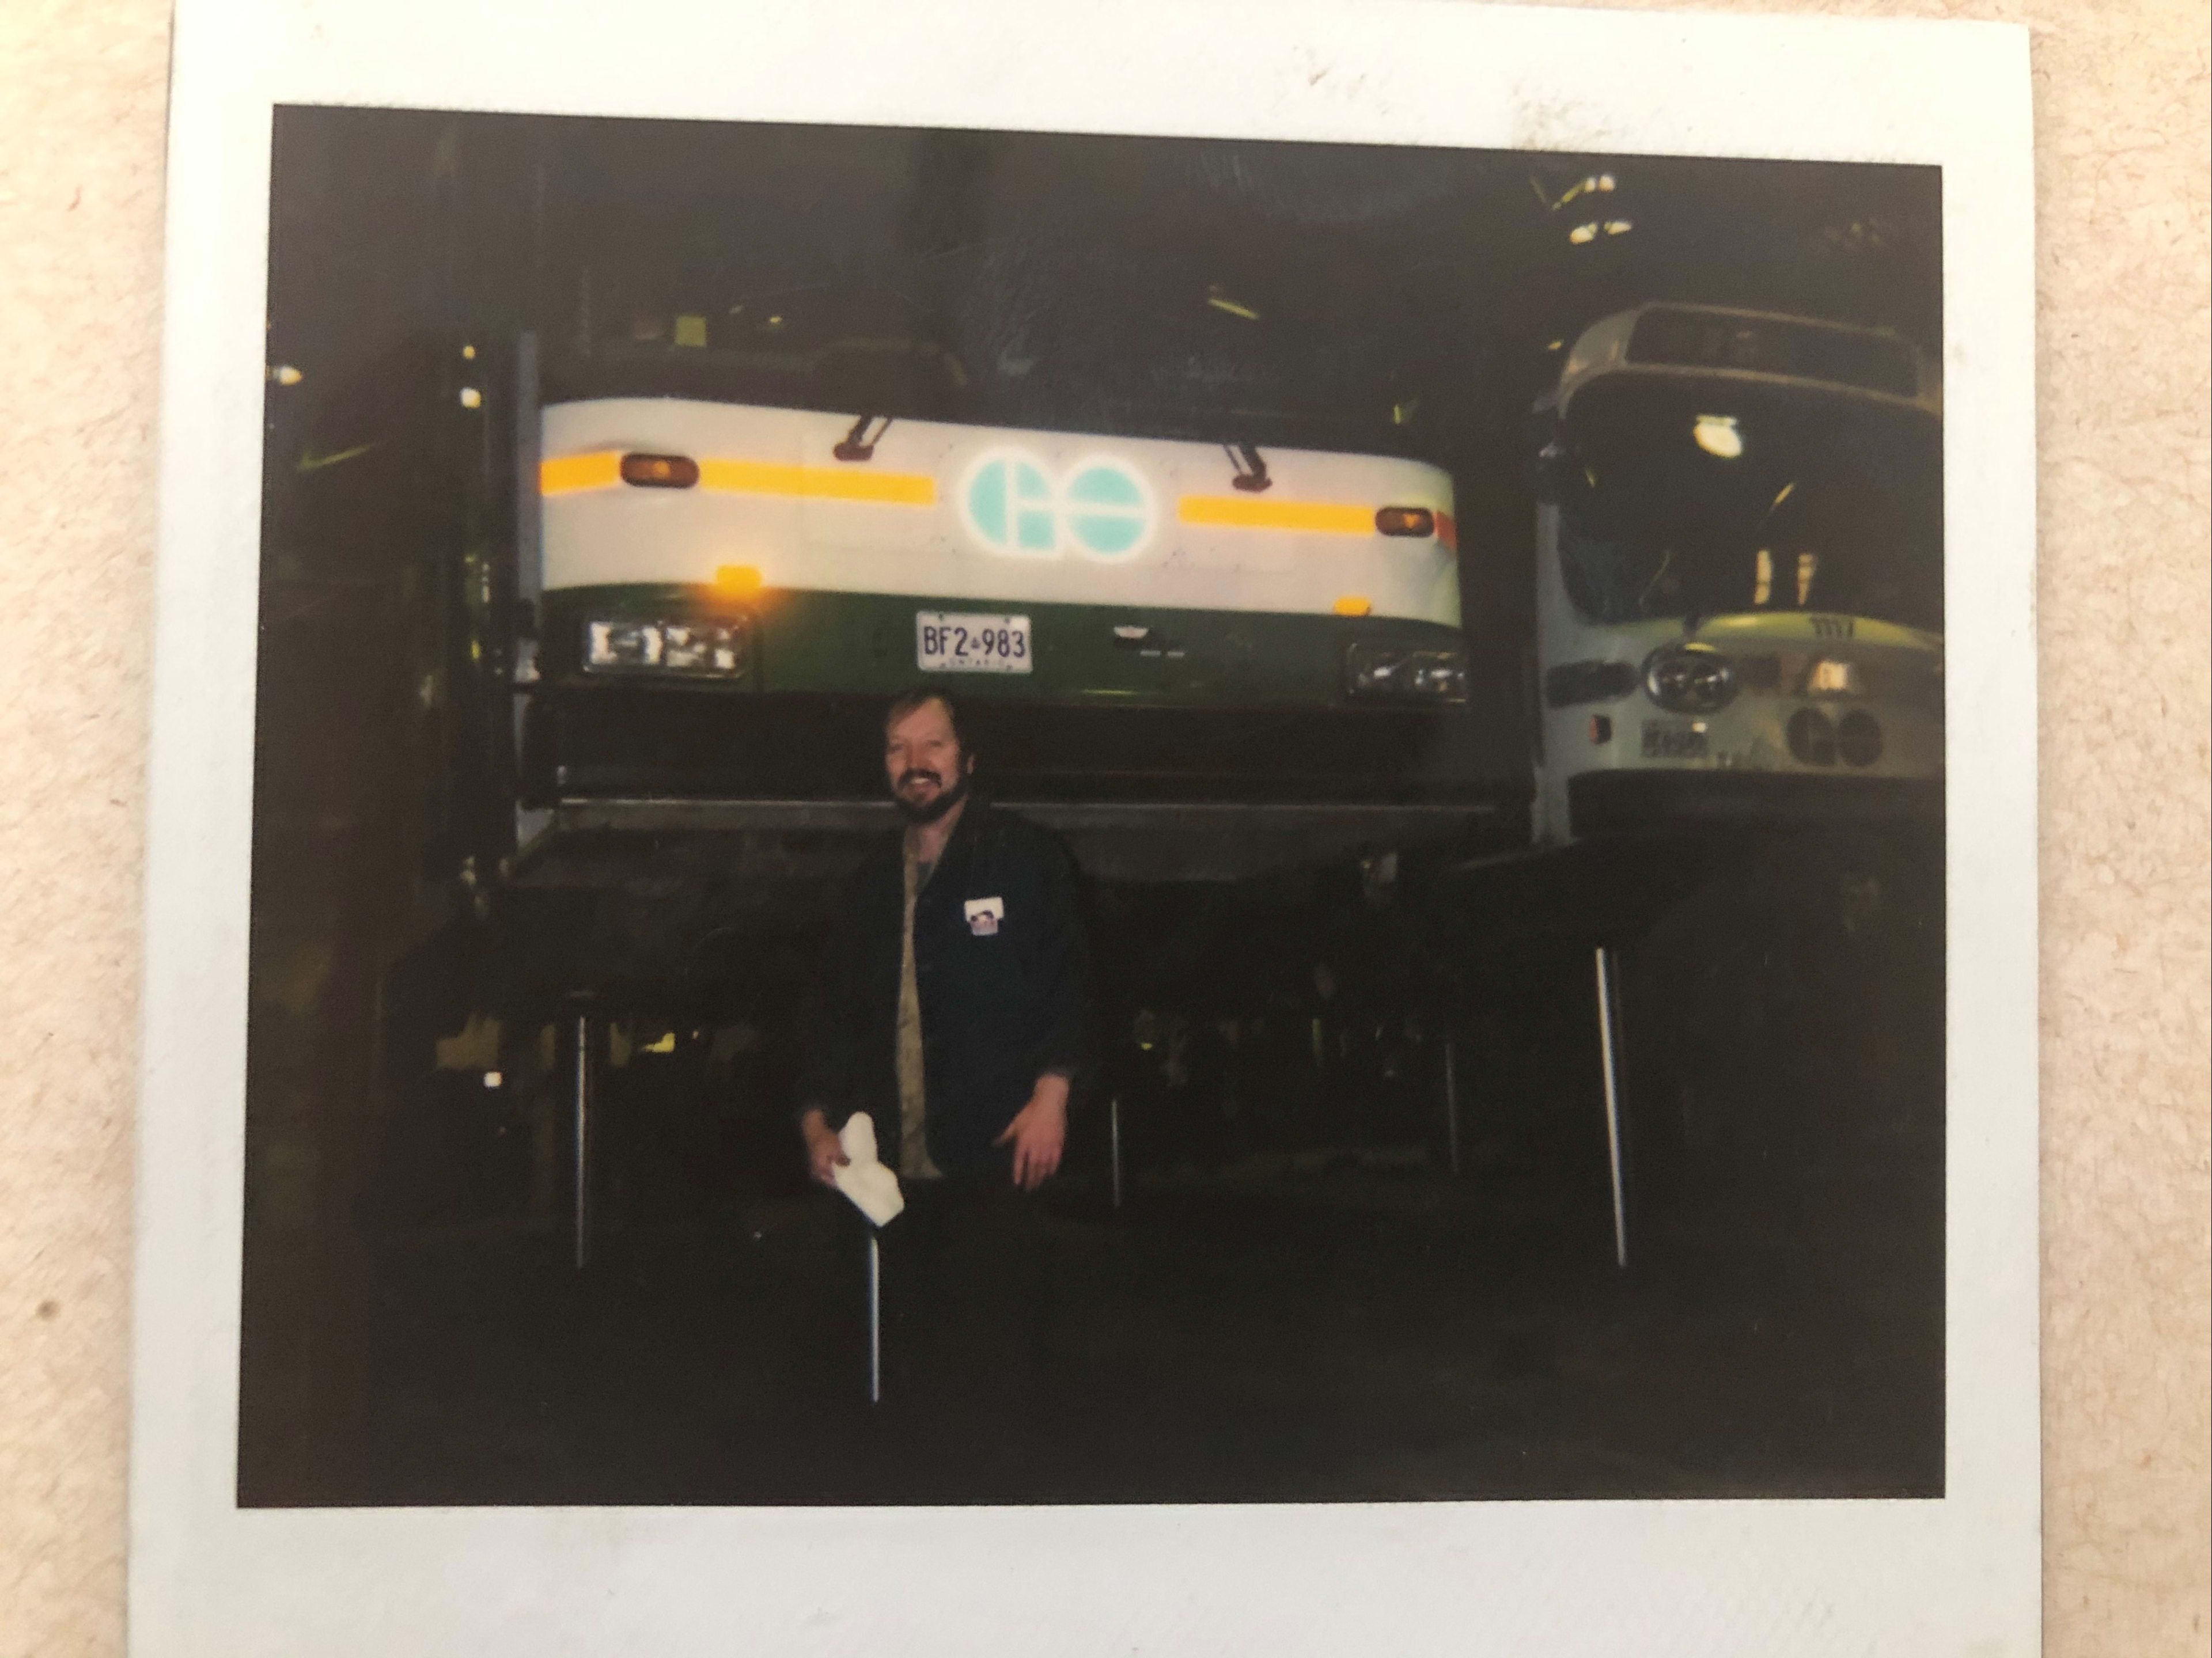 Chris stands in front of a bus.